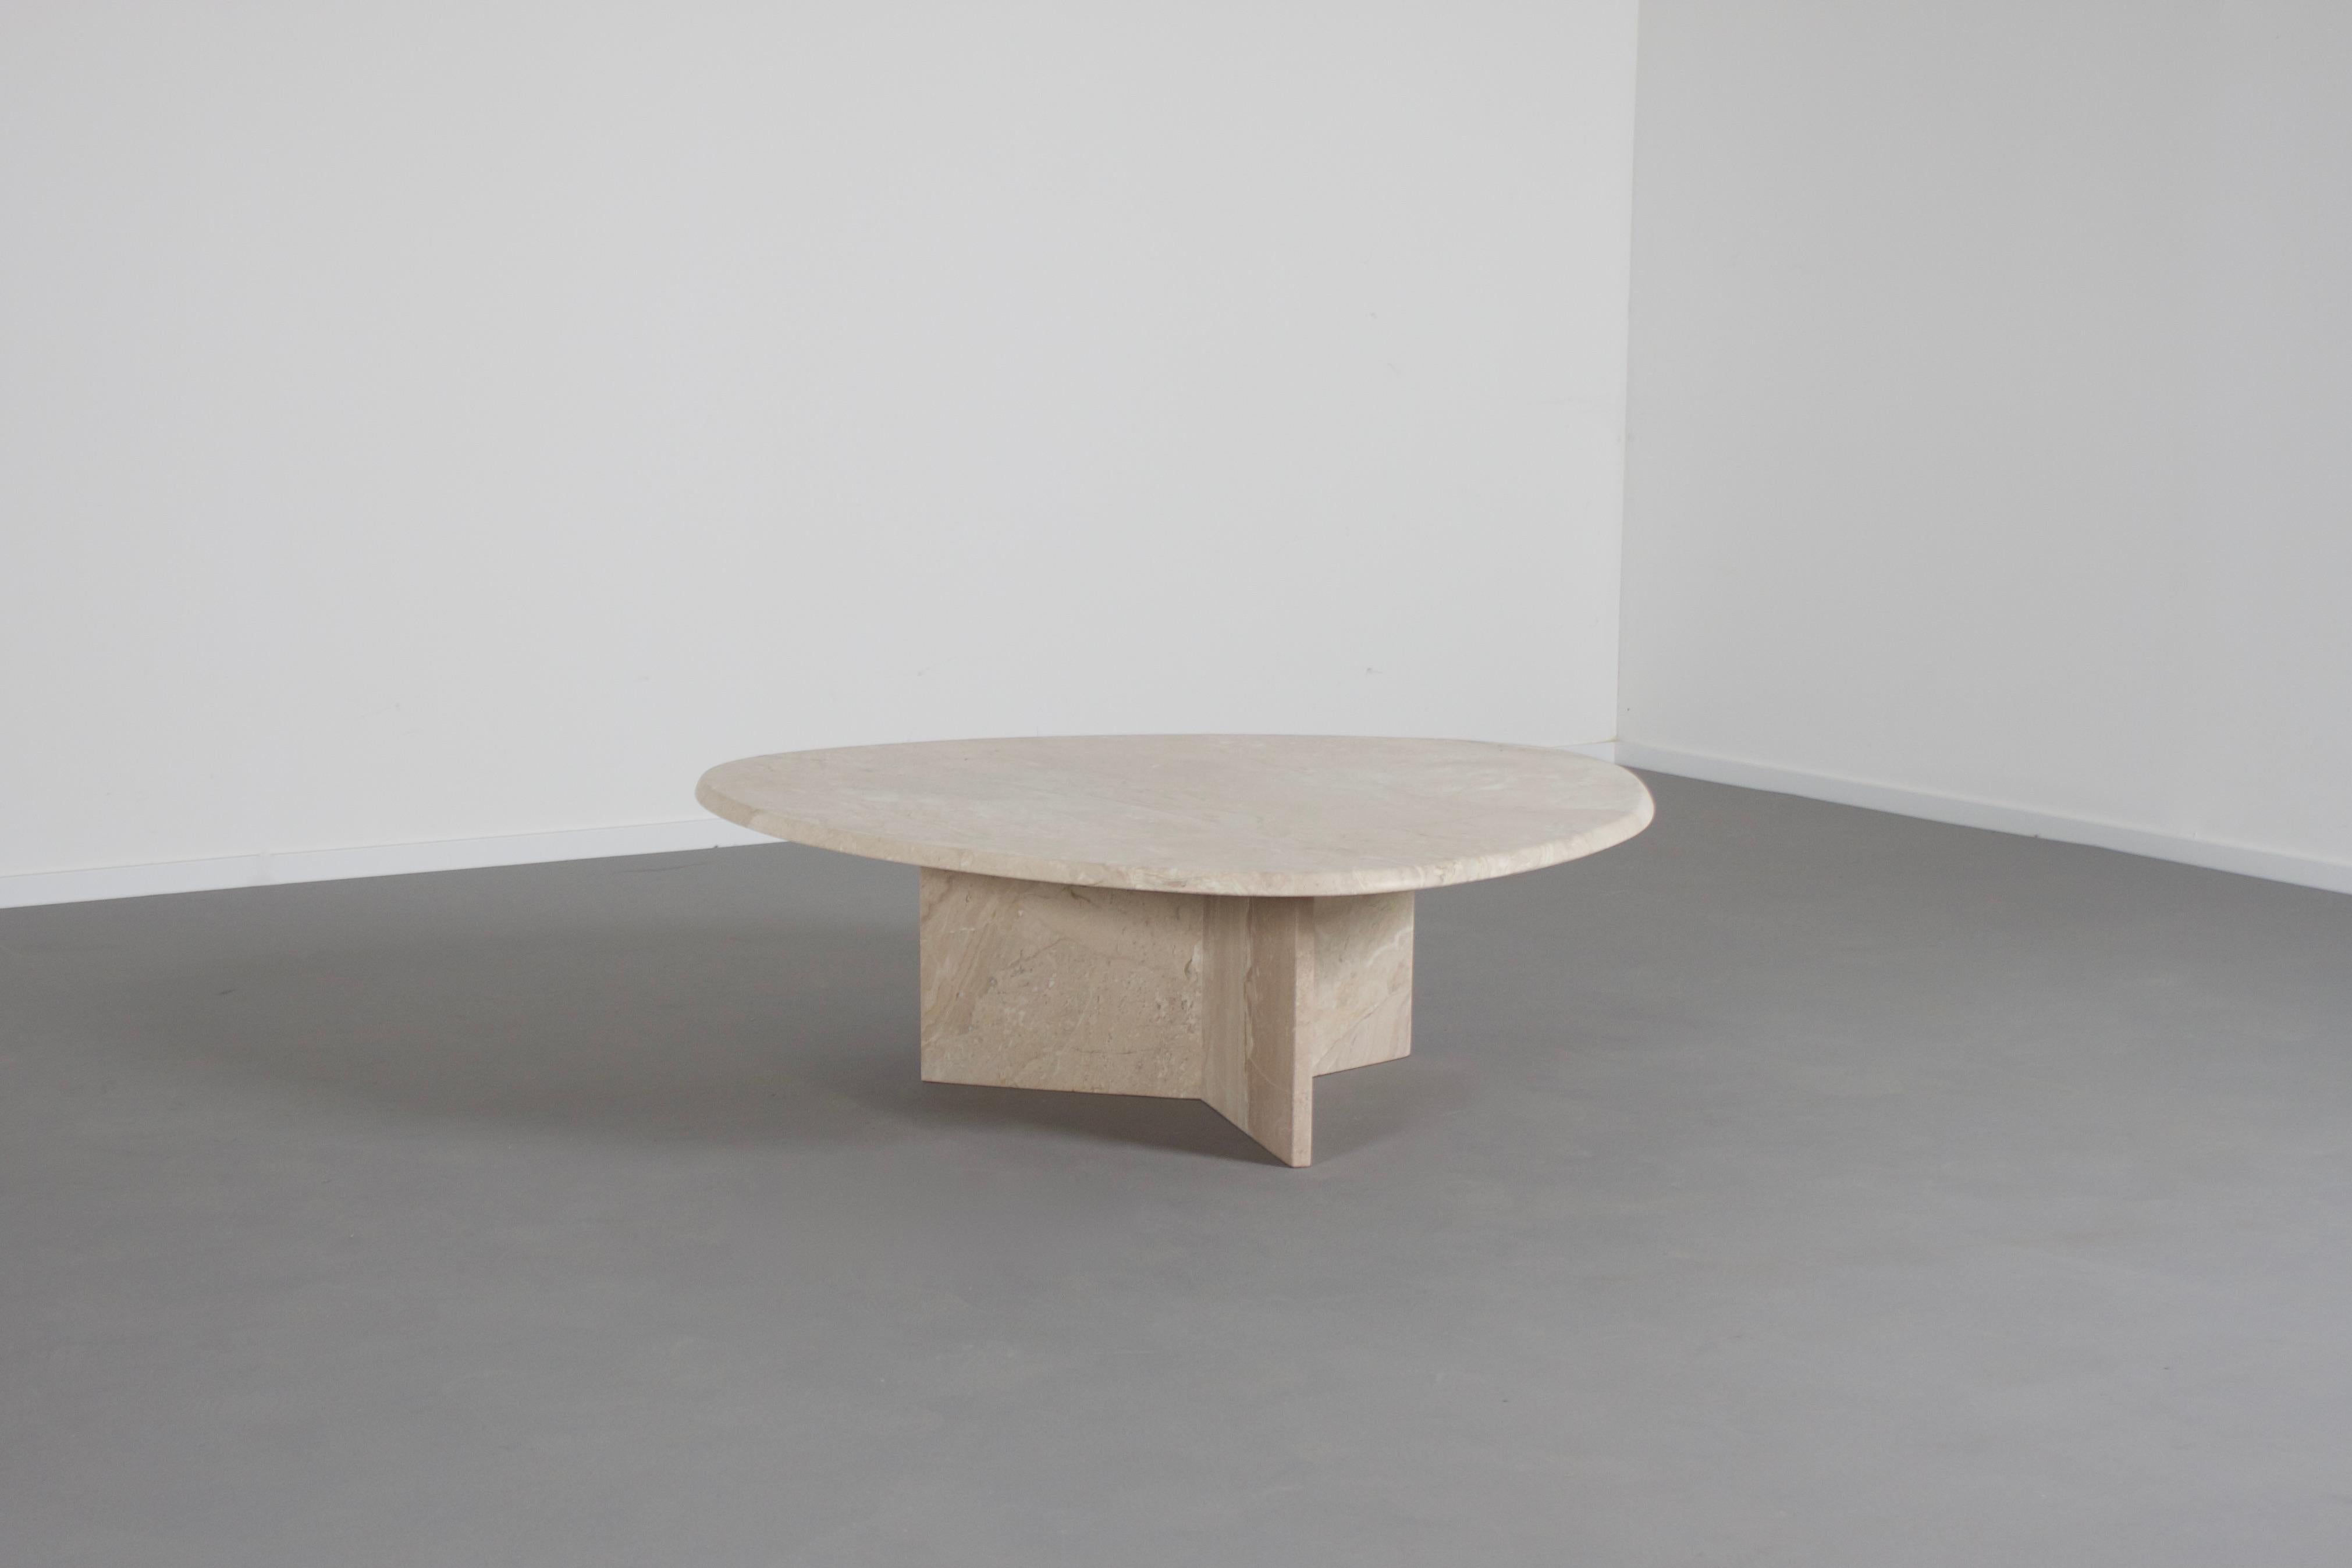 Beautiful coffee table in excellent condition.

The table has a organic triangular shaped top made of natural silky travertine.

The base is formed of three slabs of travertine which combine into a star shape.

The travertine surface is absolutely